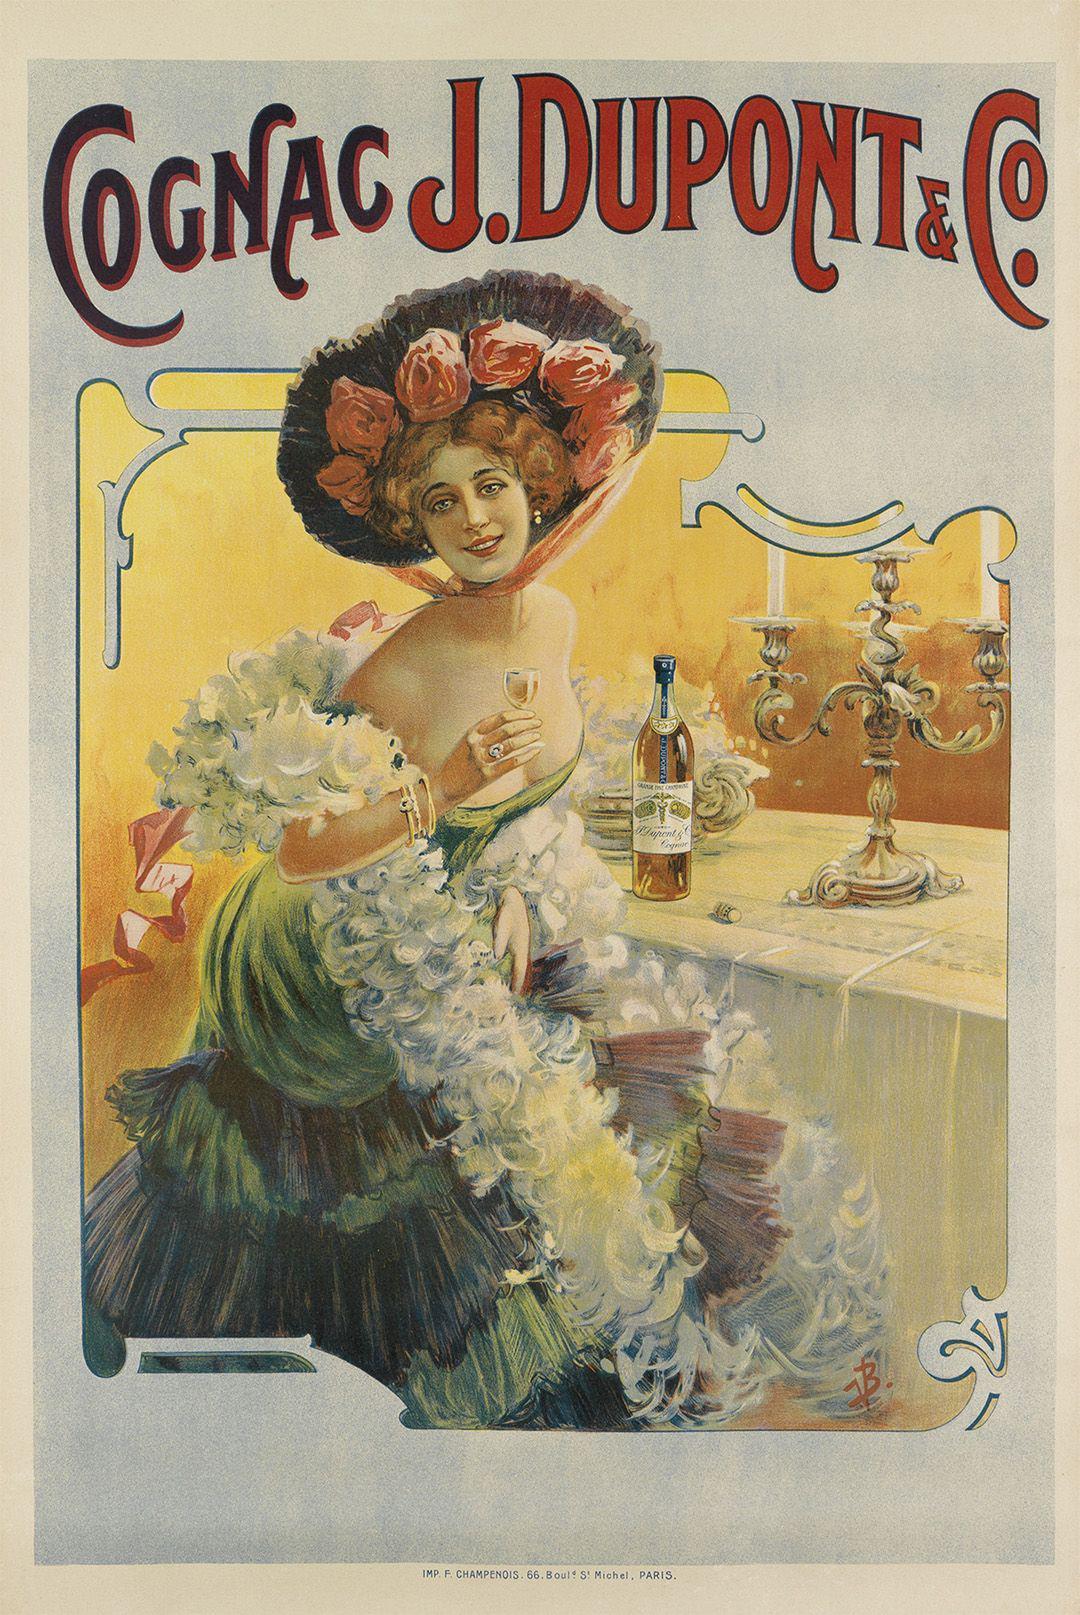 Poster for Cognac J Dupont and Co by Bocchino Circa1905